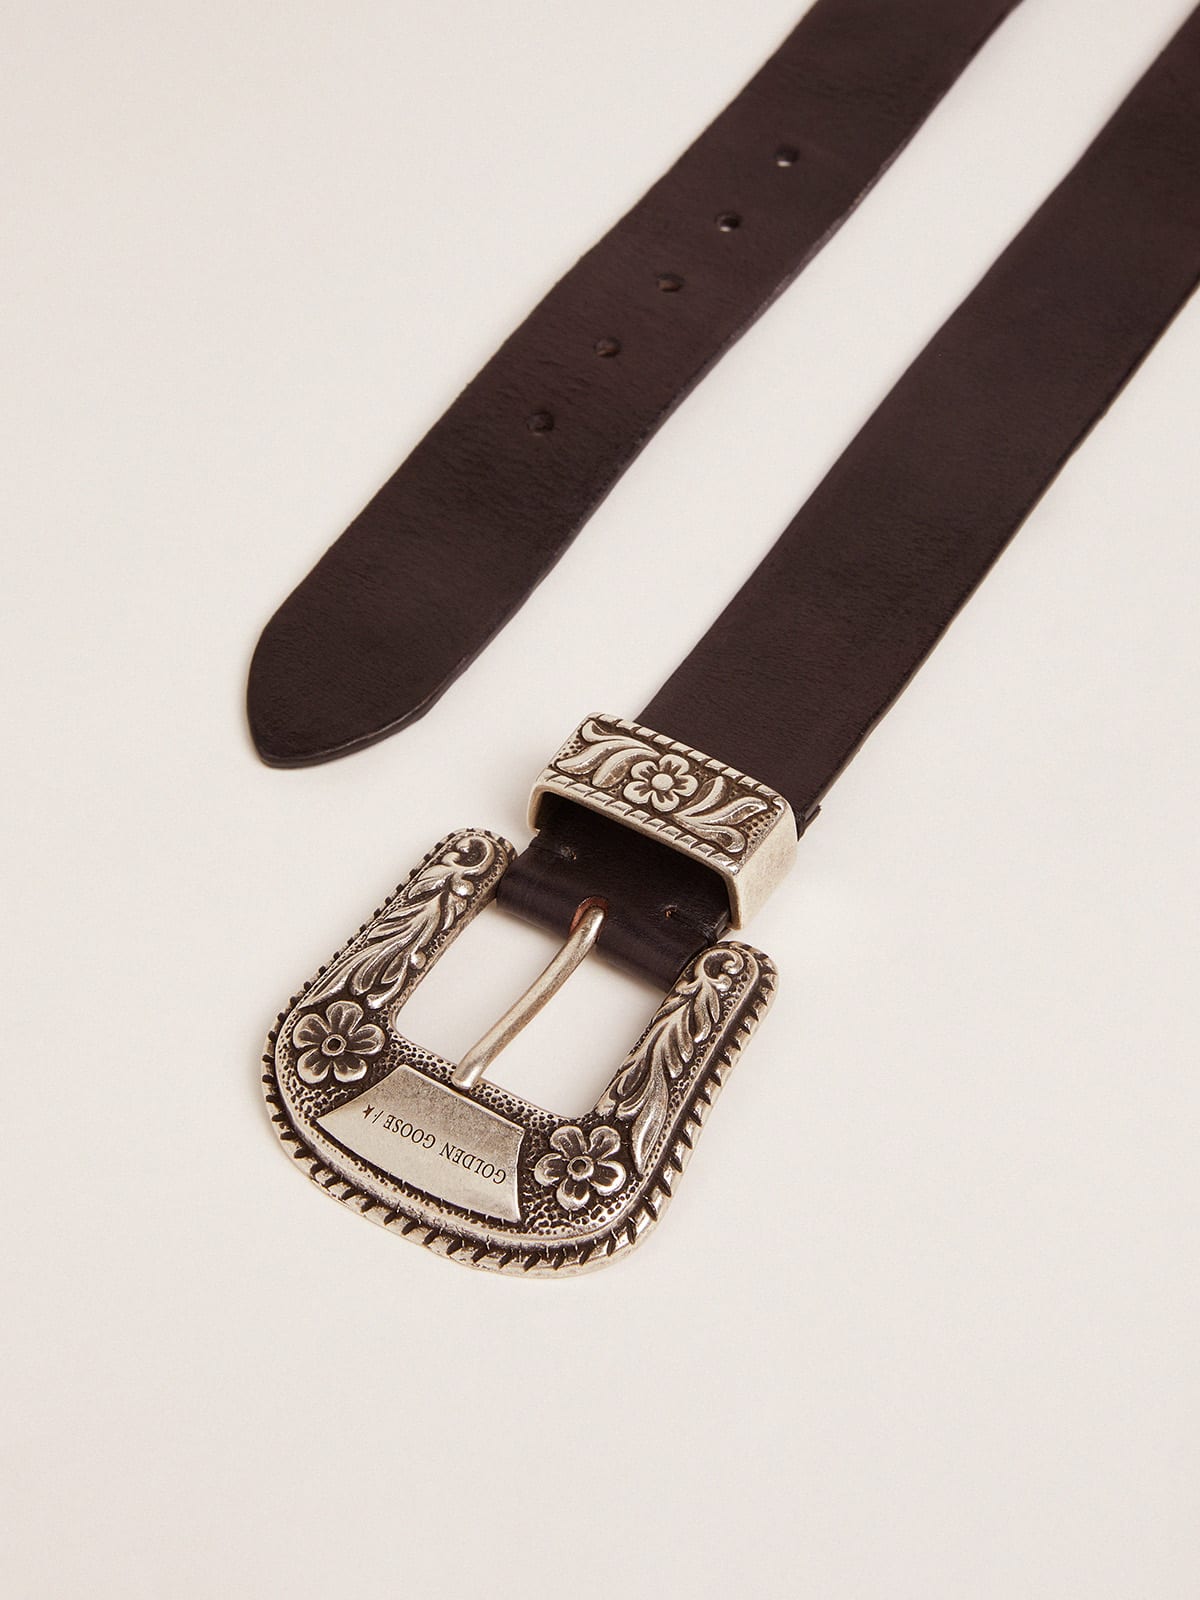 Golden Goose - Women's belt in black leather with silver decorated buckle in 